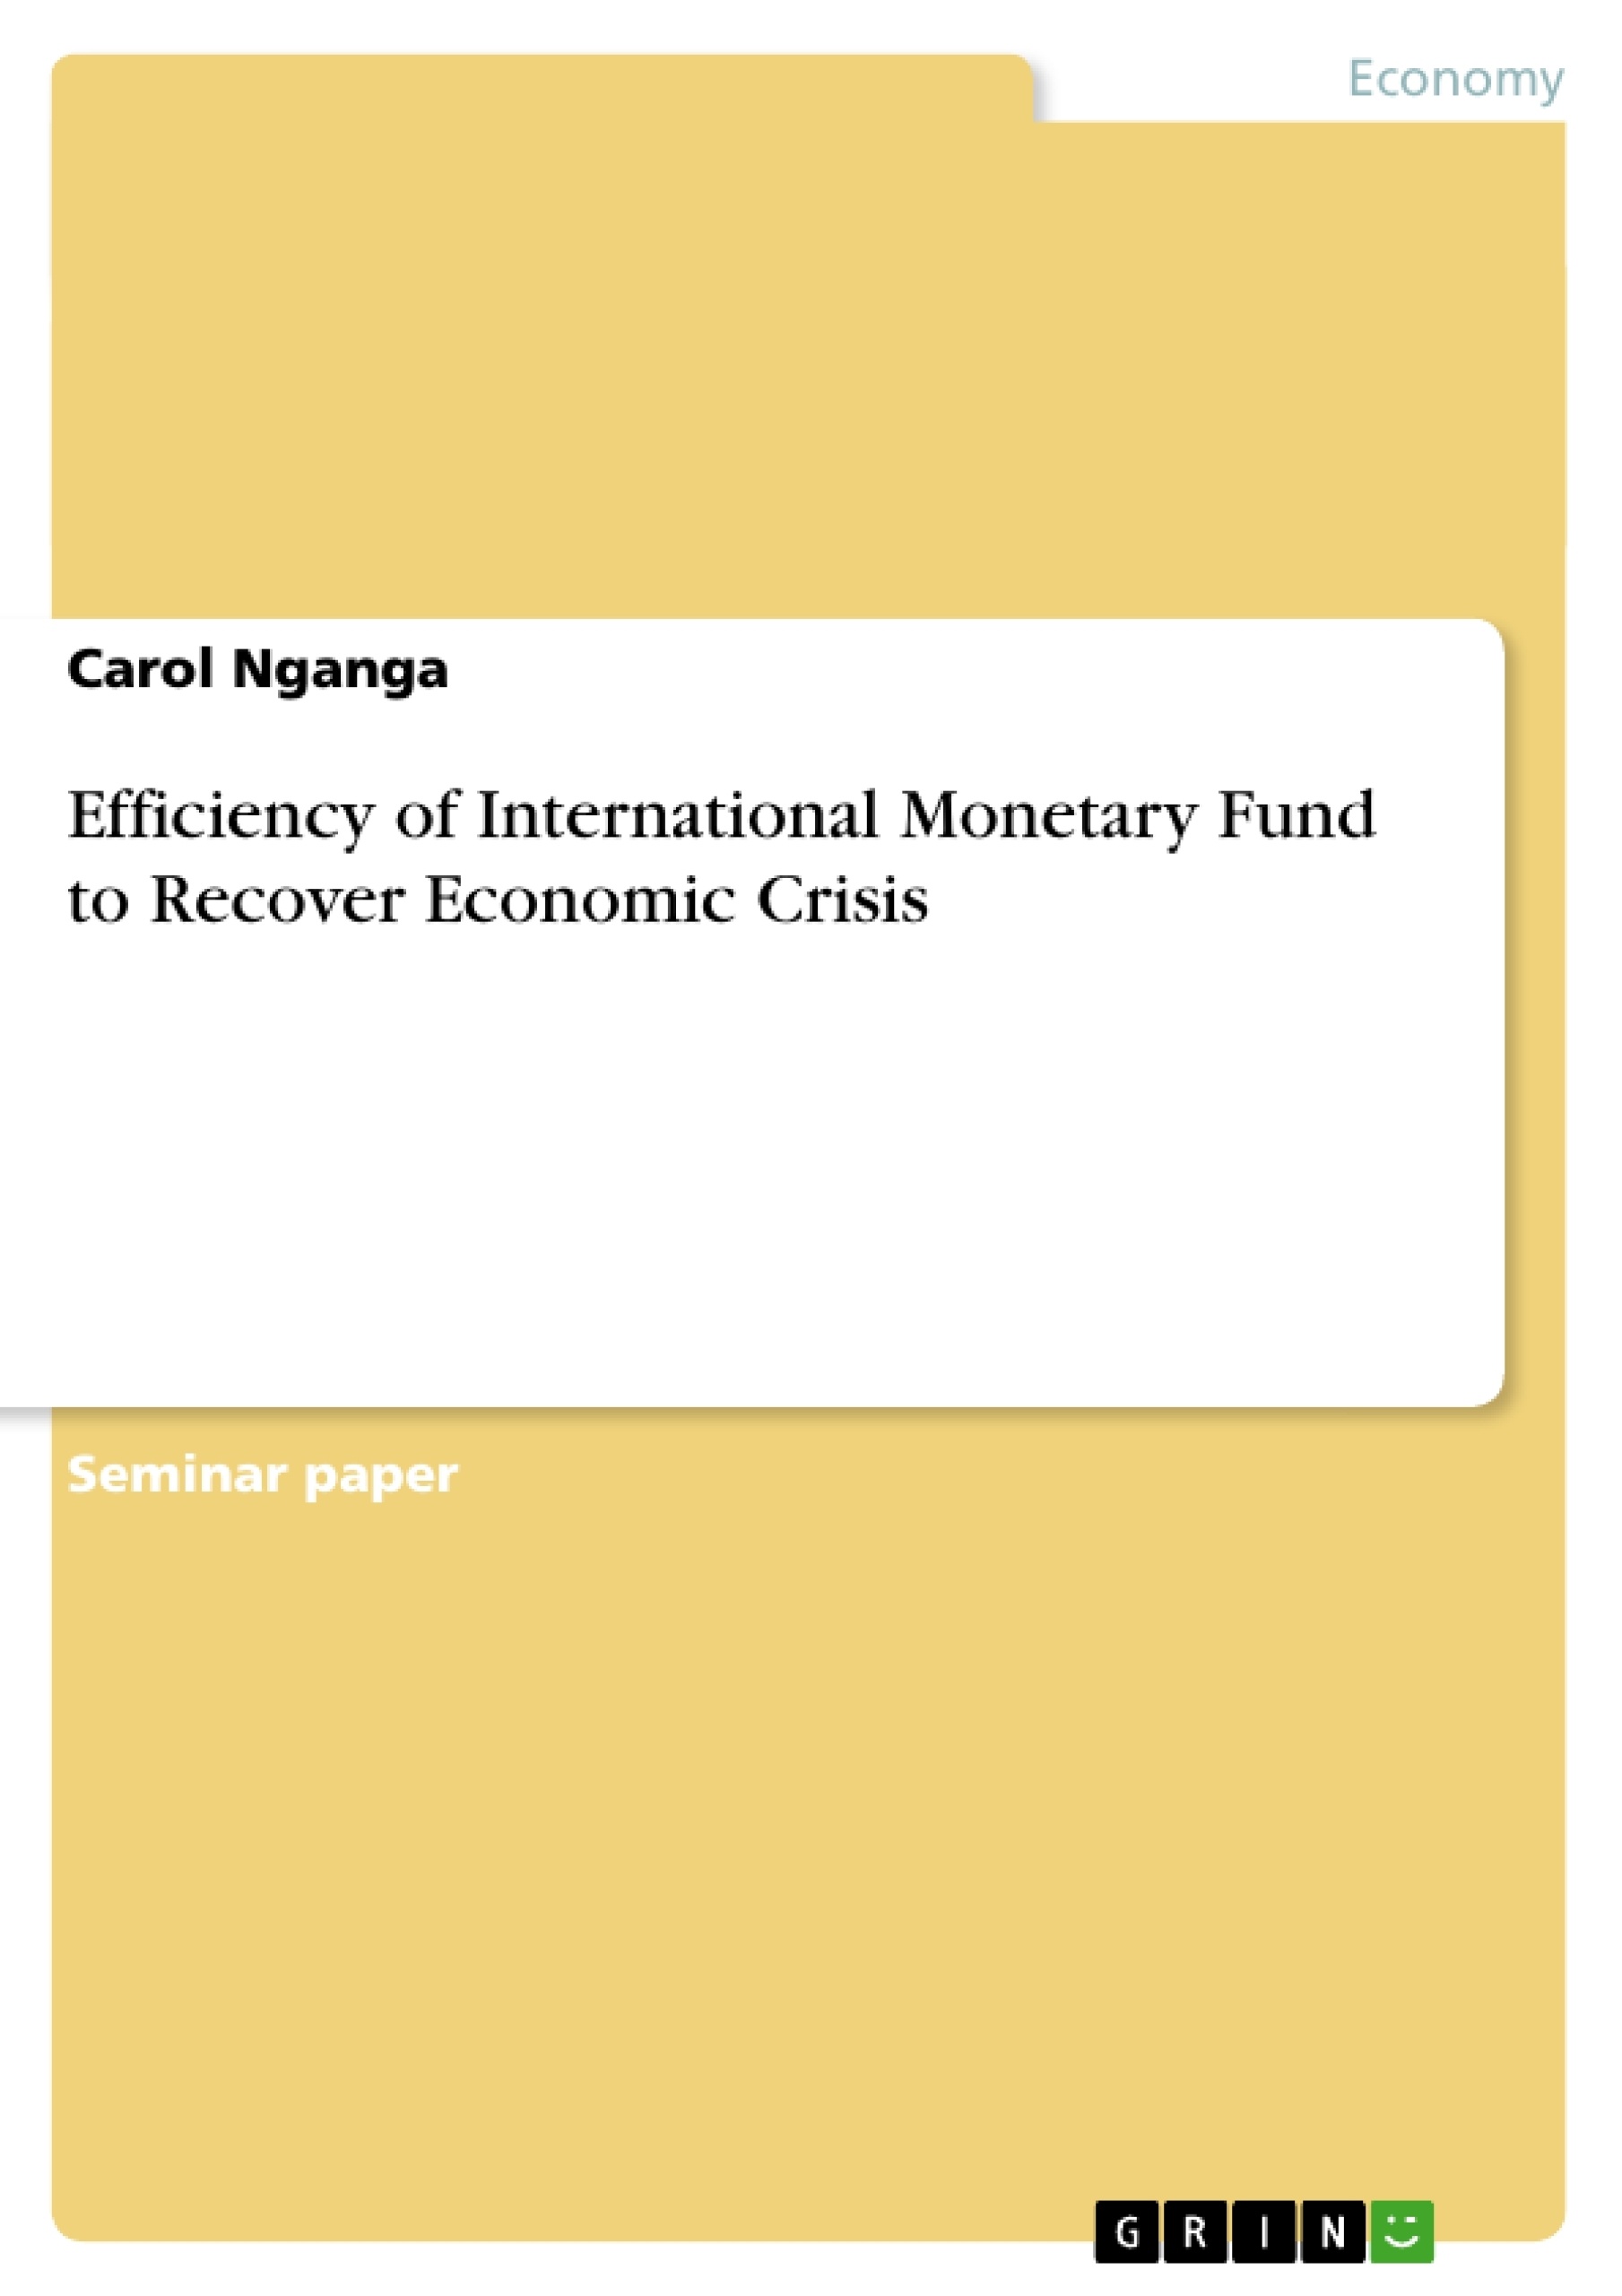 Título: Efficiency of International Monetary Fund to Recover Economic Crisis